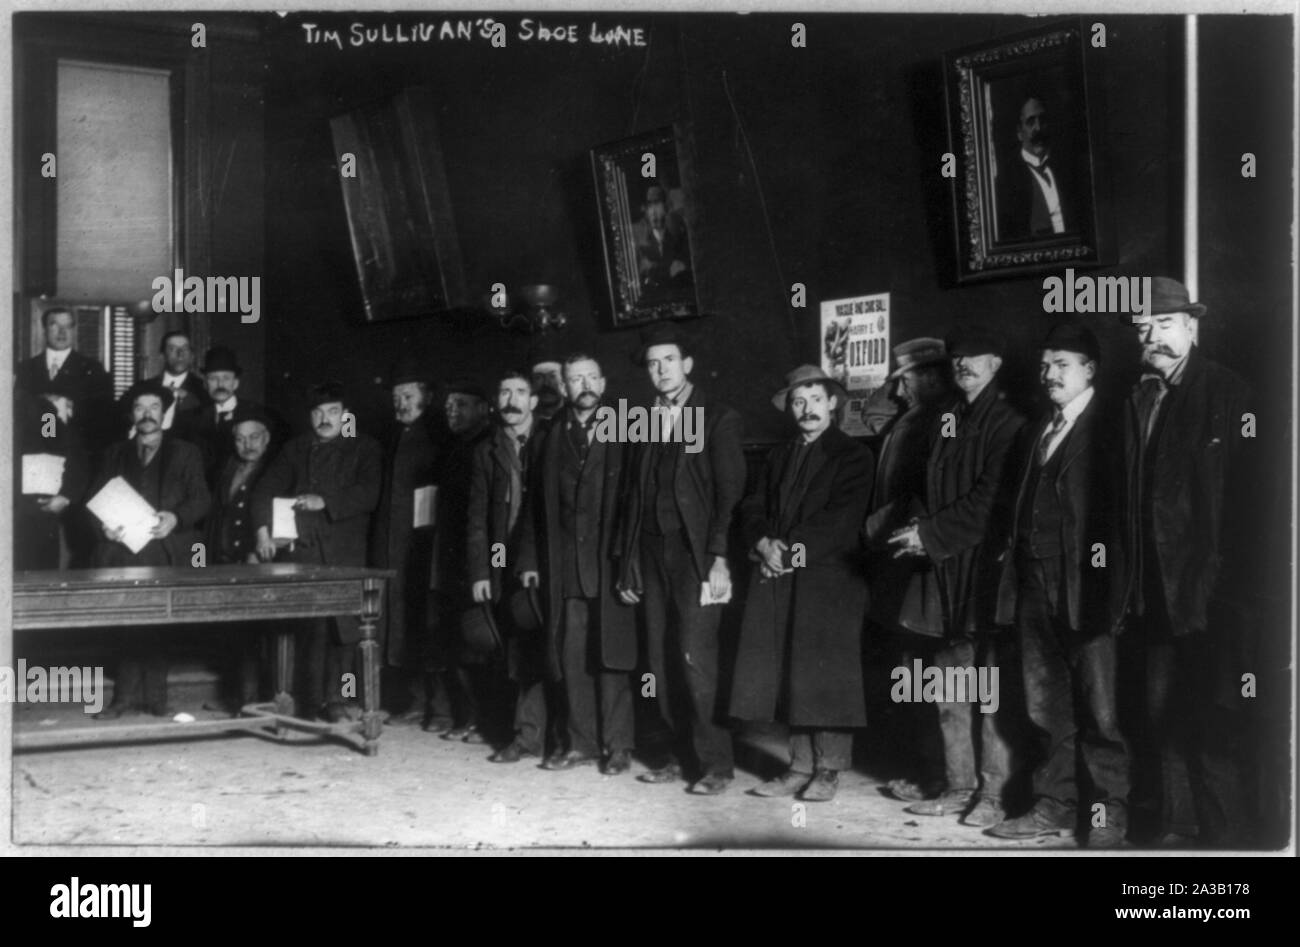 Shoe line - Bowery men waiting for shoes - a gift from Tim Sullivan Stock Photo